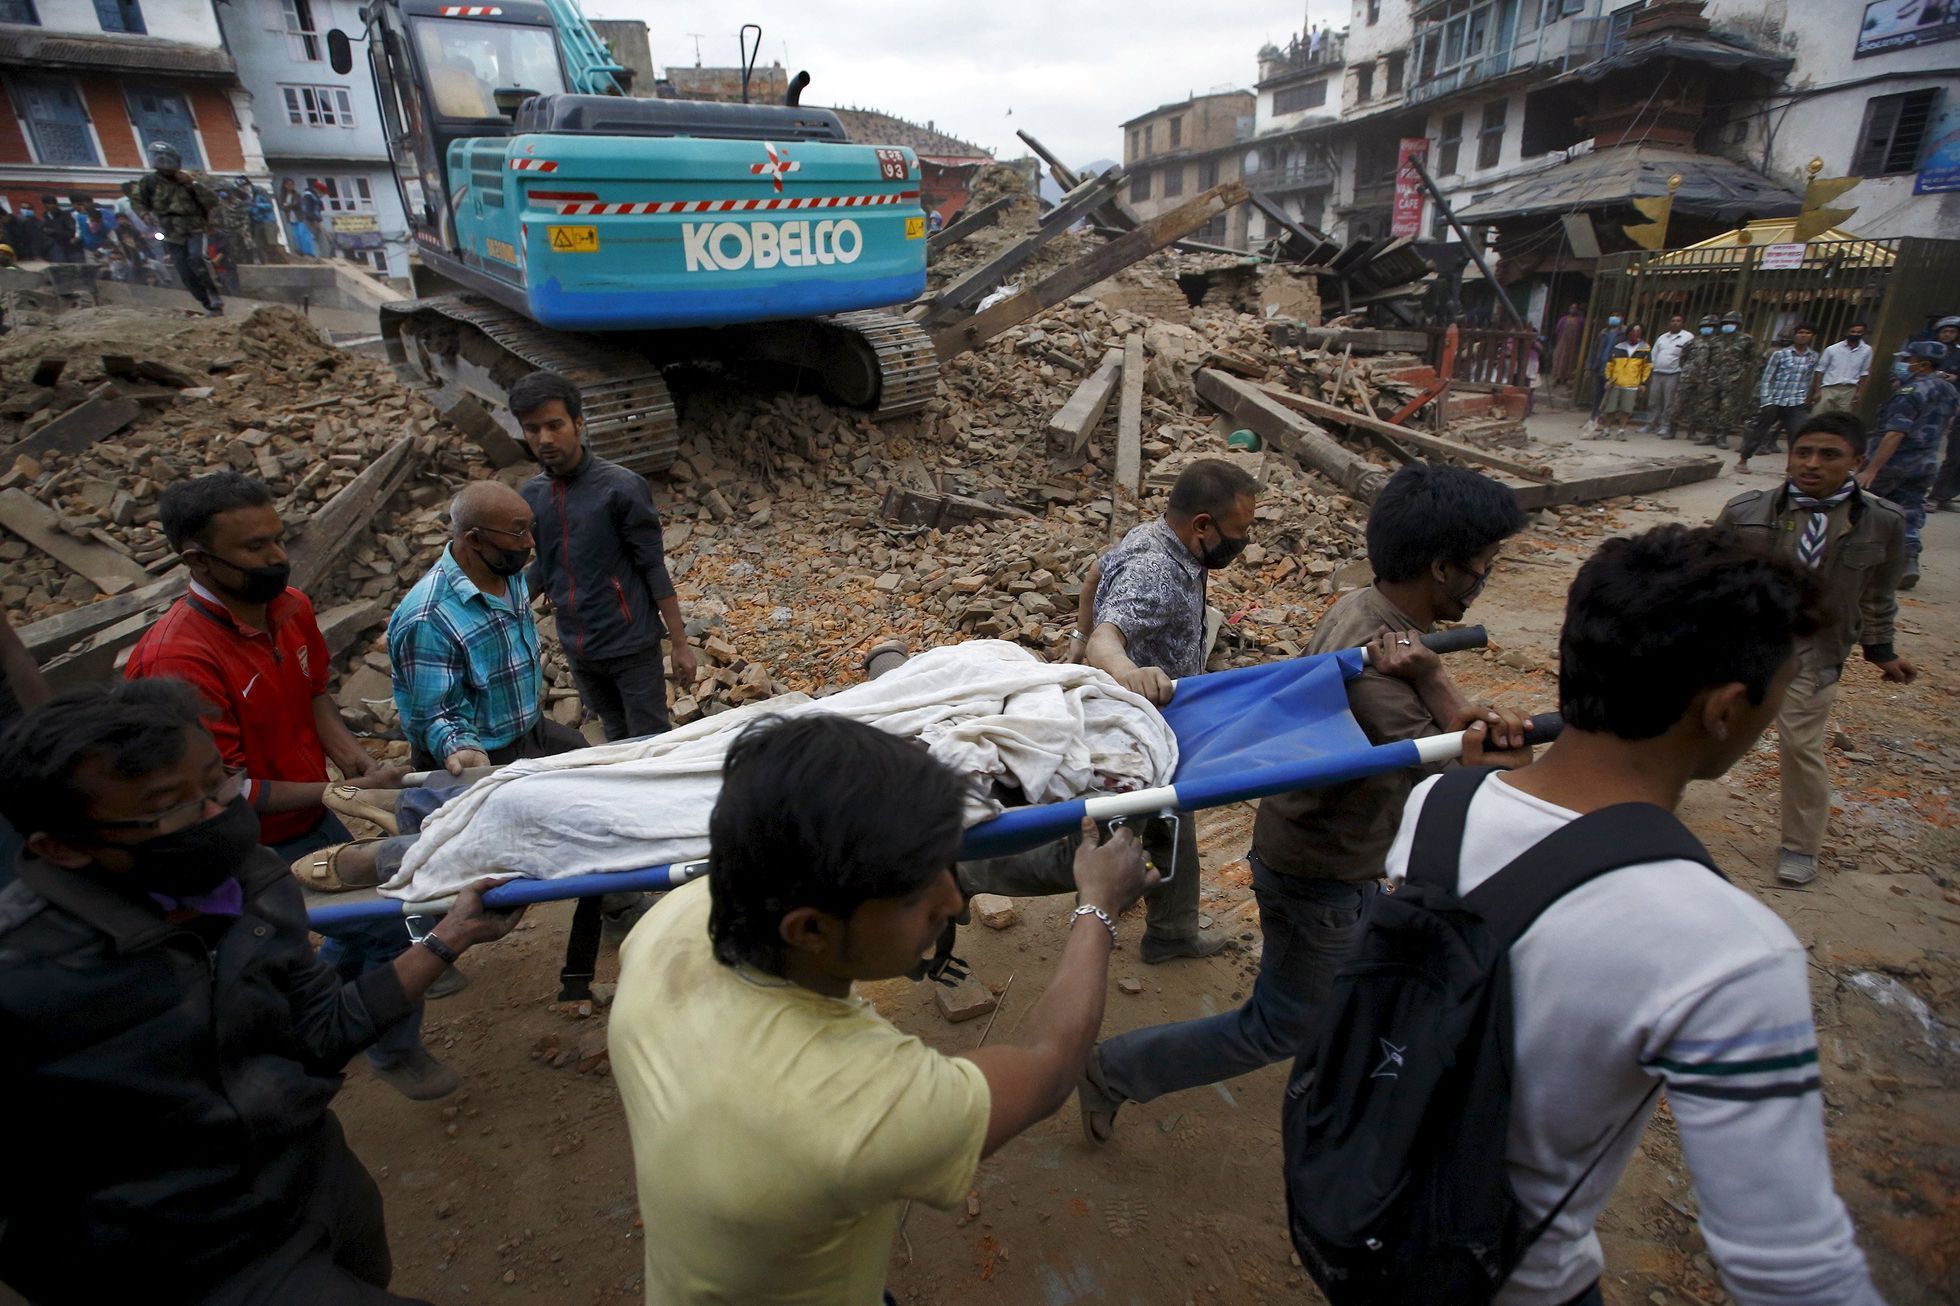 Rescue workers carry the body of a victim on a stretcher, after a 7.9 magnitude earthquake hit, in Kathmandu, Nepal